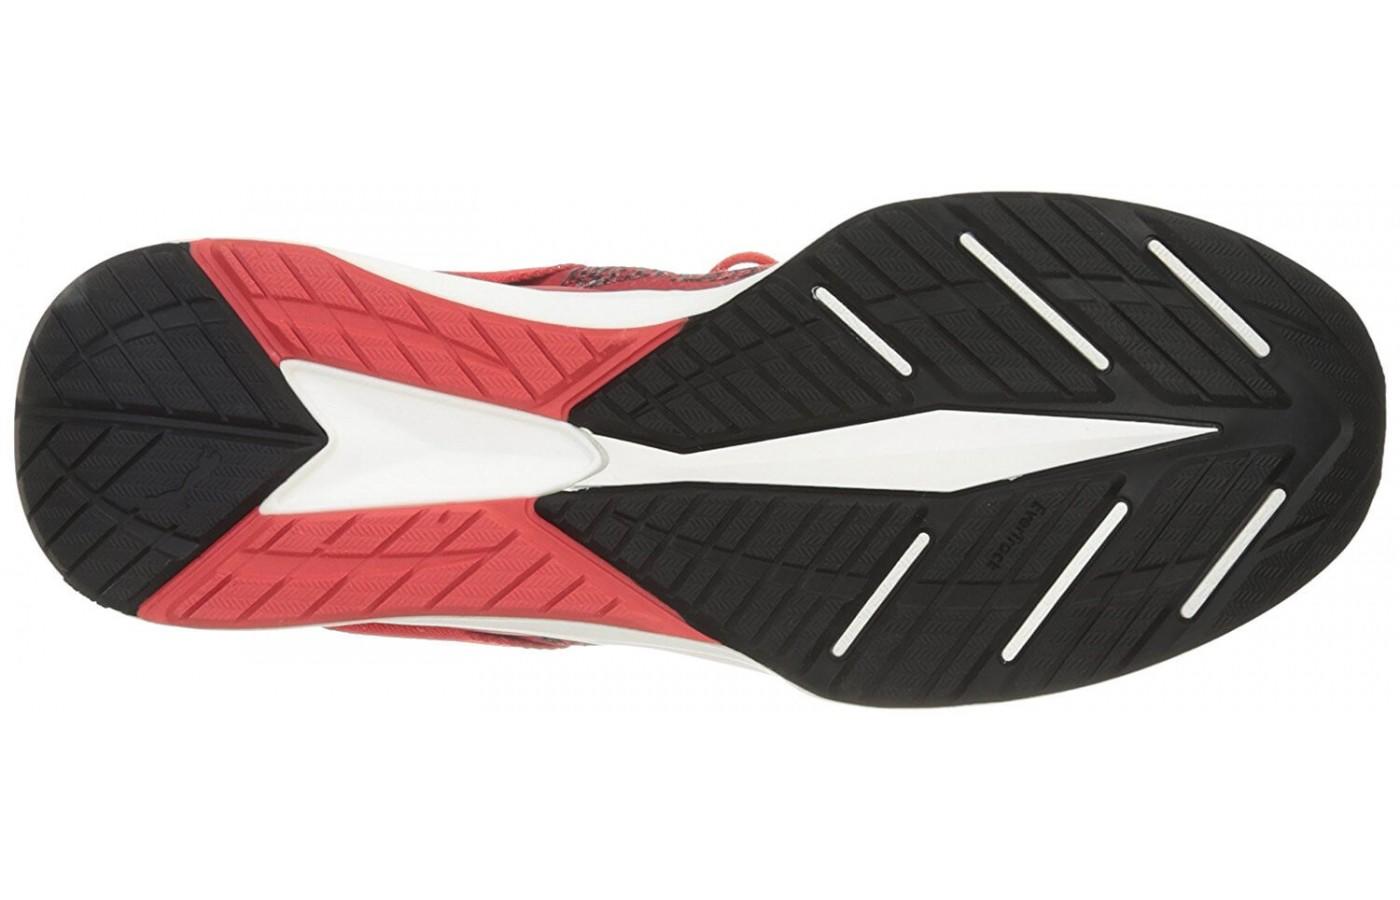 the outsole of the Puma Ignite evoKnit is outfitted with numerous flex grooves